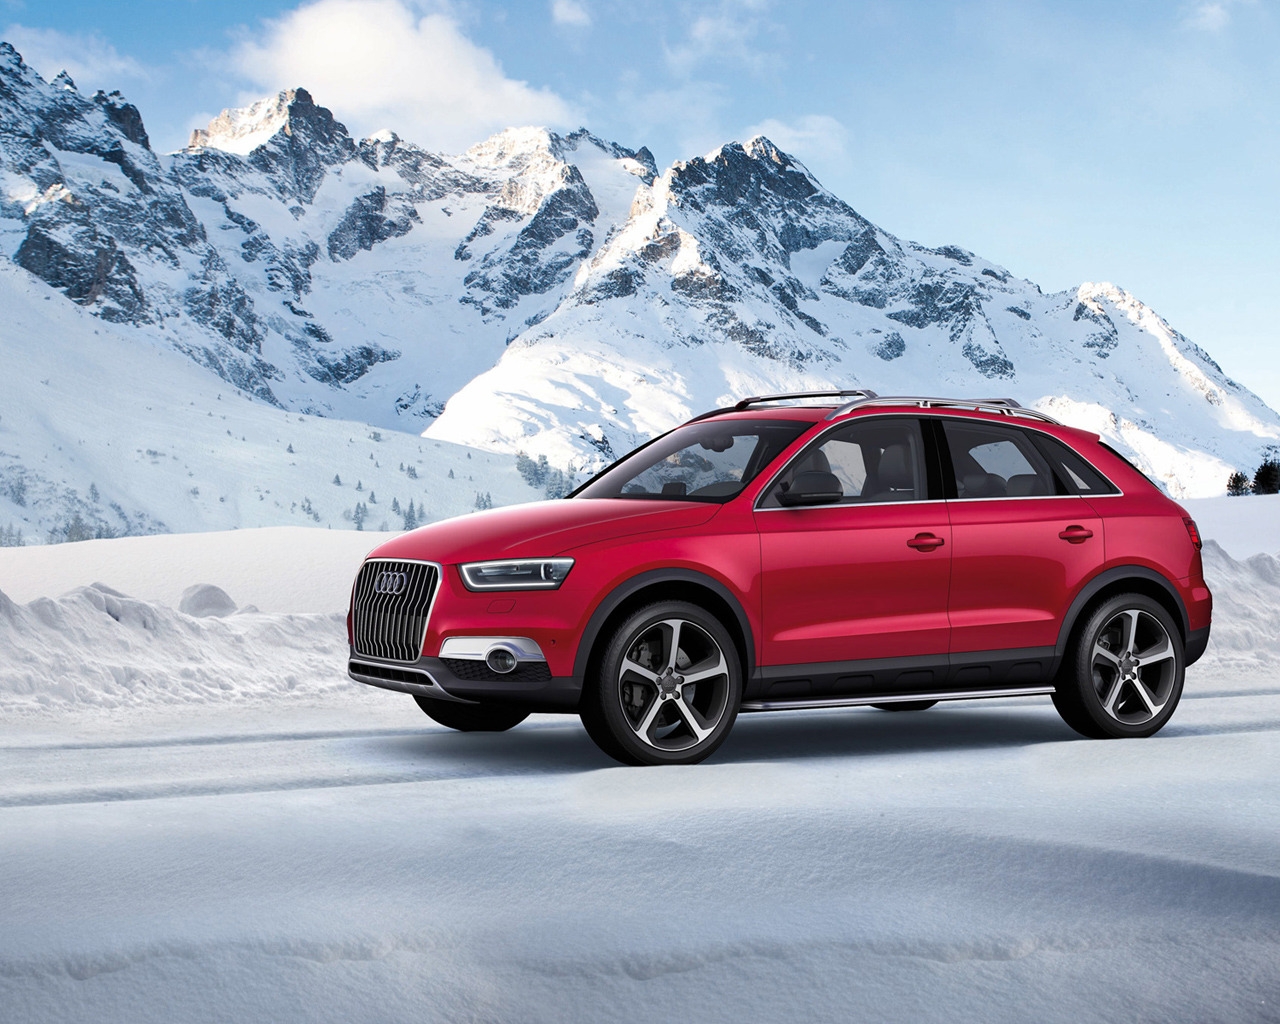 Audi Q3 Vail 2012 for 1280 x 1024 resolution